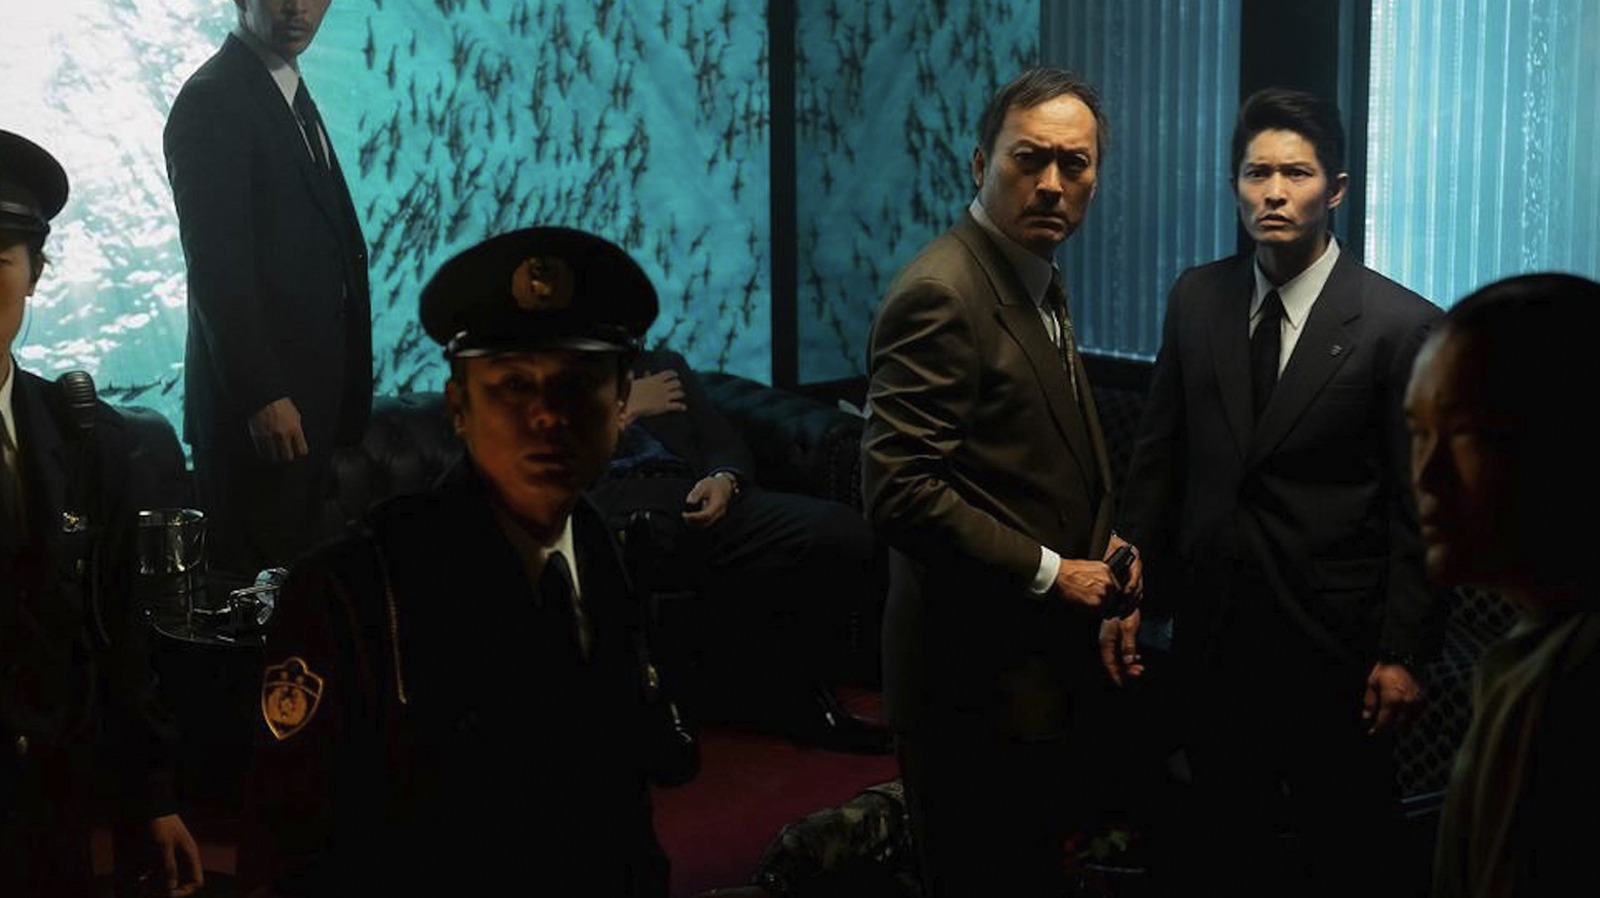 #Tokyo Vice Actor Ken Watanabe On The Duality Of His Character And Working With Michael Mann [Interview]